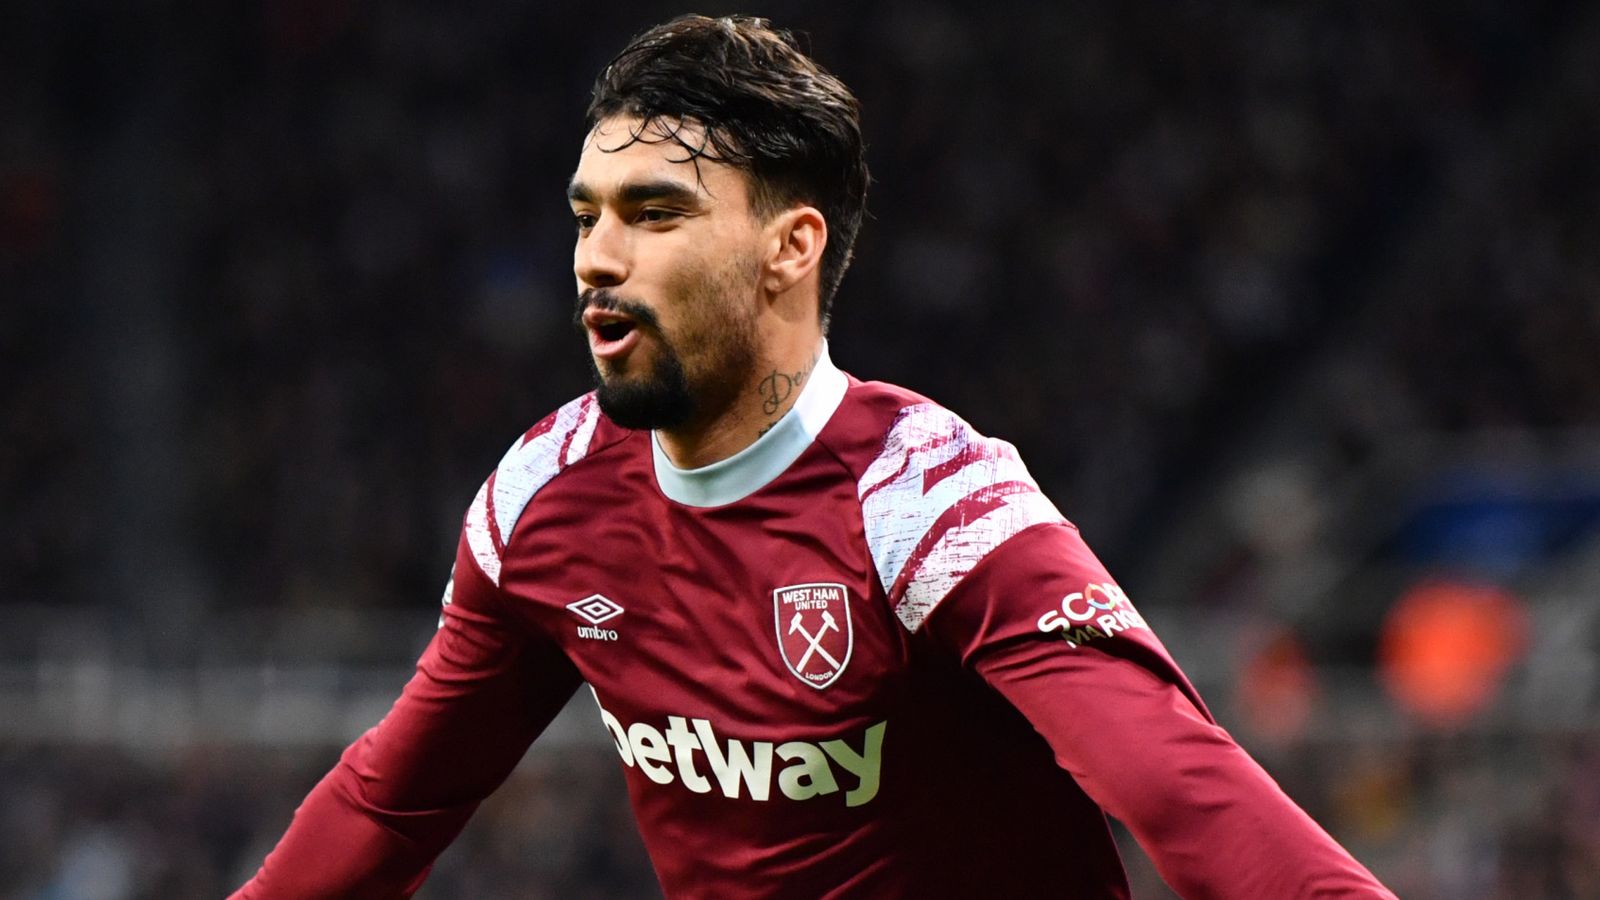 Newcastle 1-1 West Ham: Lucas Paqueta levels after Callum Wilson opener to earn Hammers a point